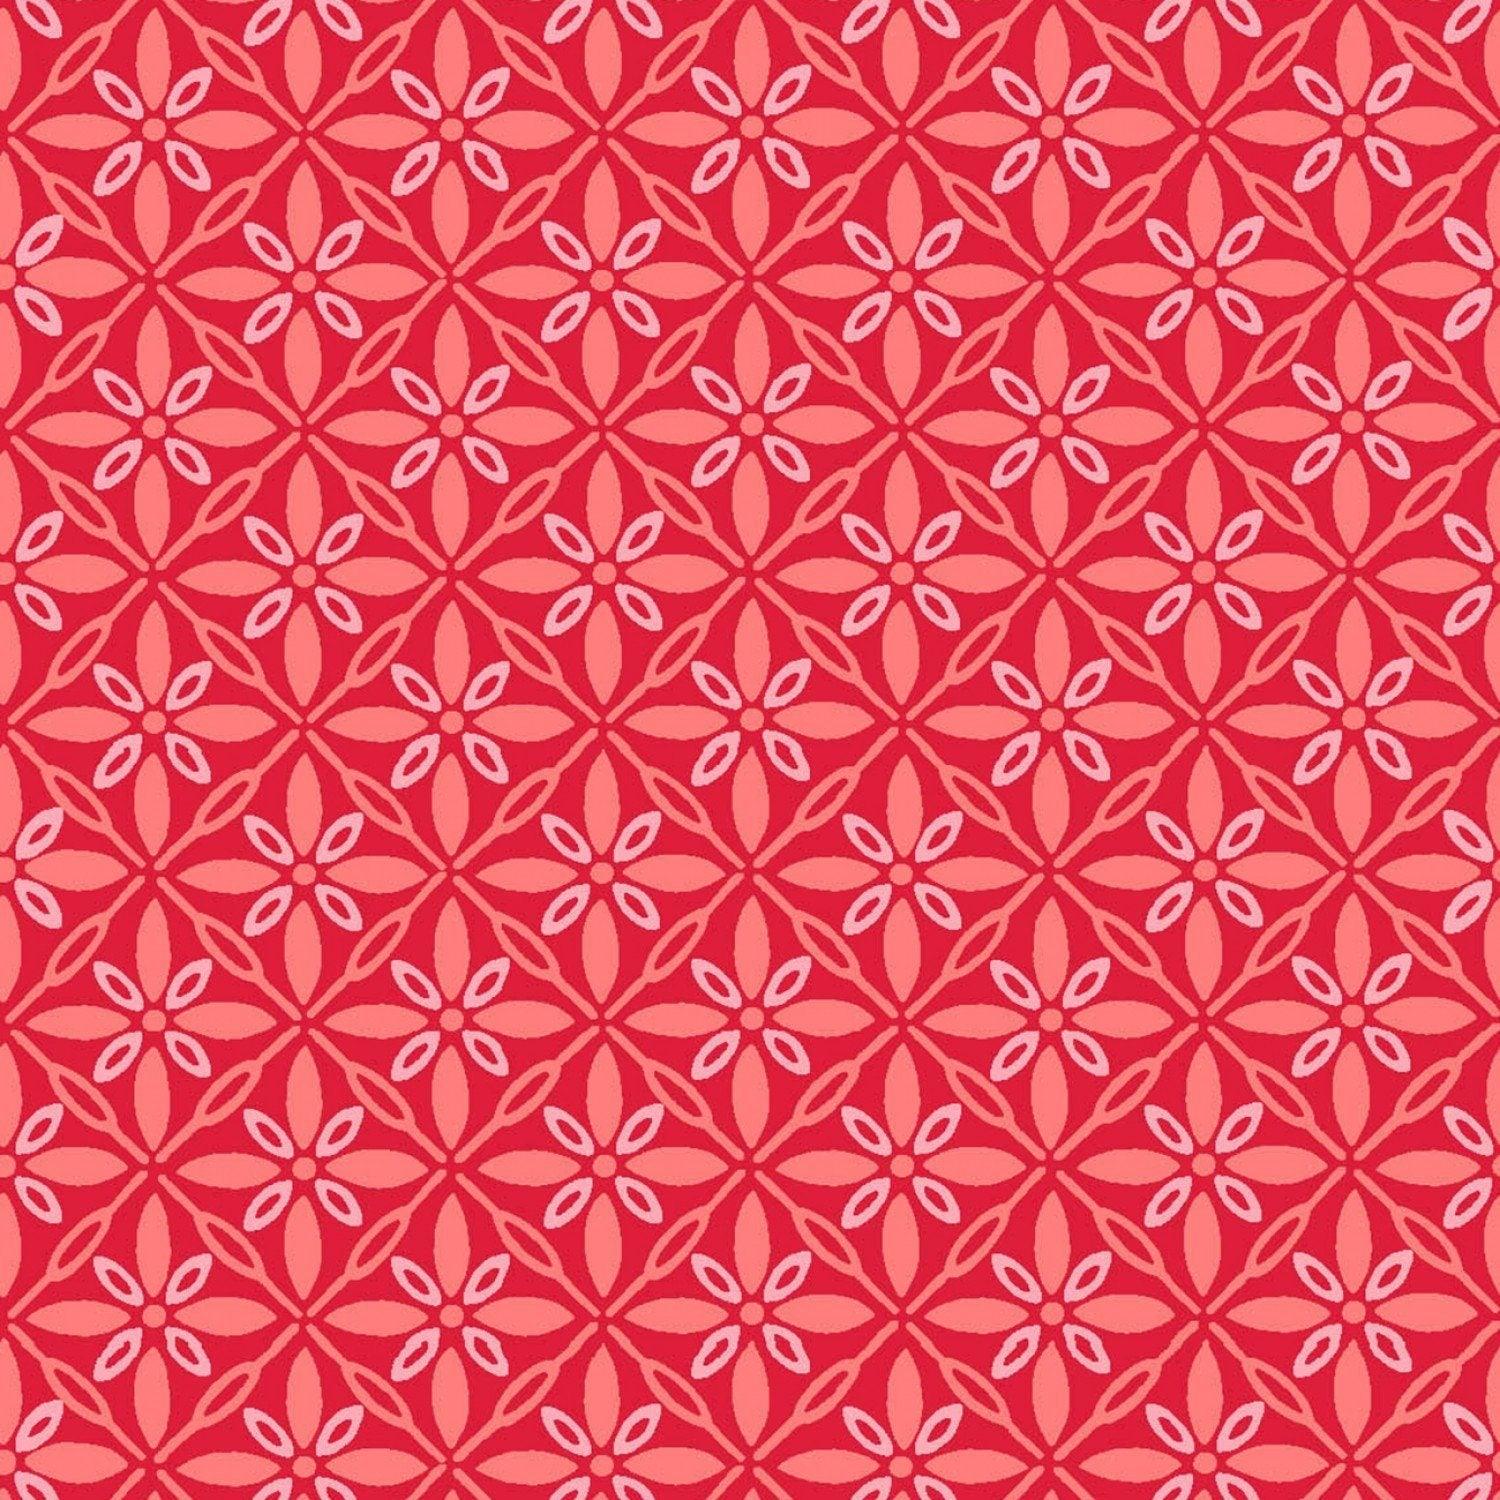 Tufted Star - Red - 44" Wide - Kimberbell Basics - Kawartha Quilting and Sewing LTD.